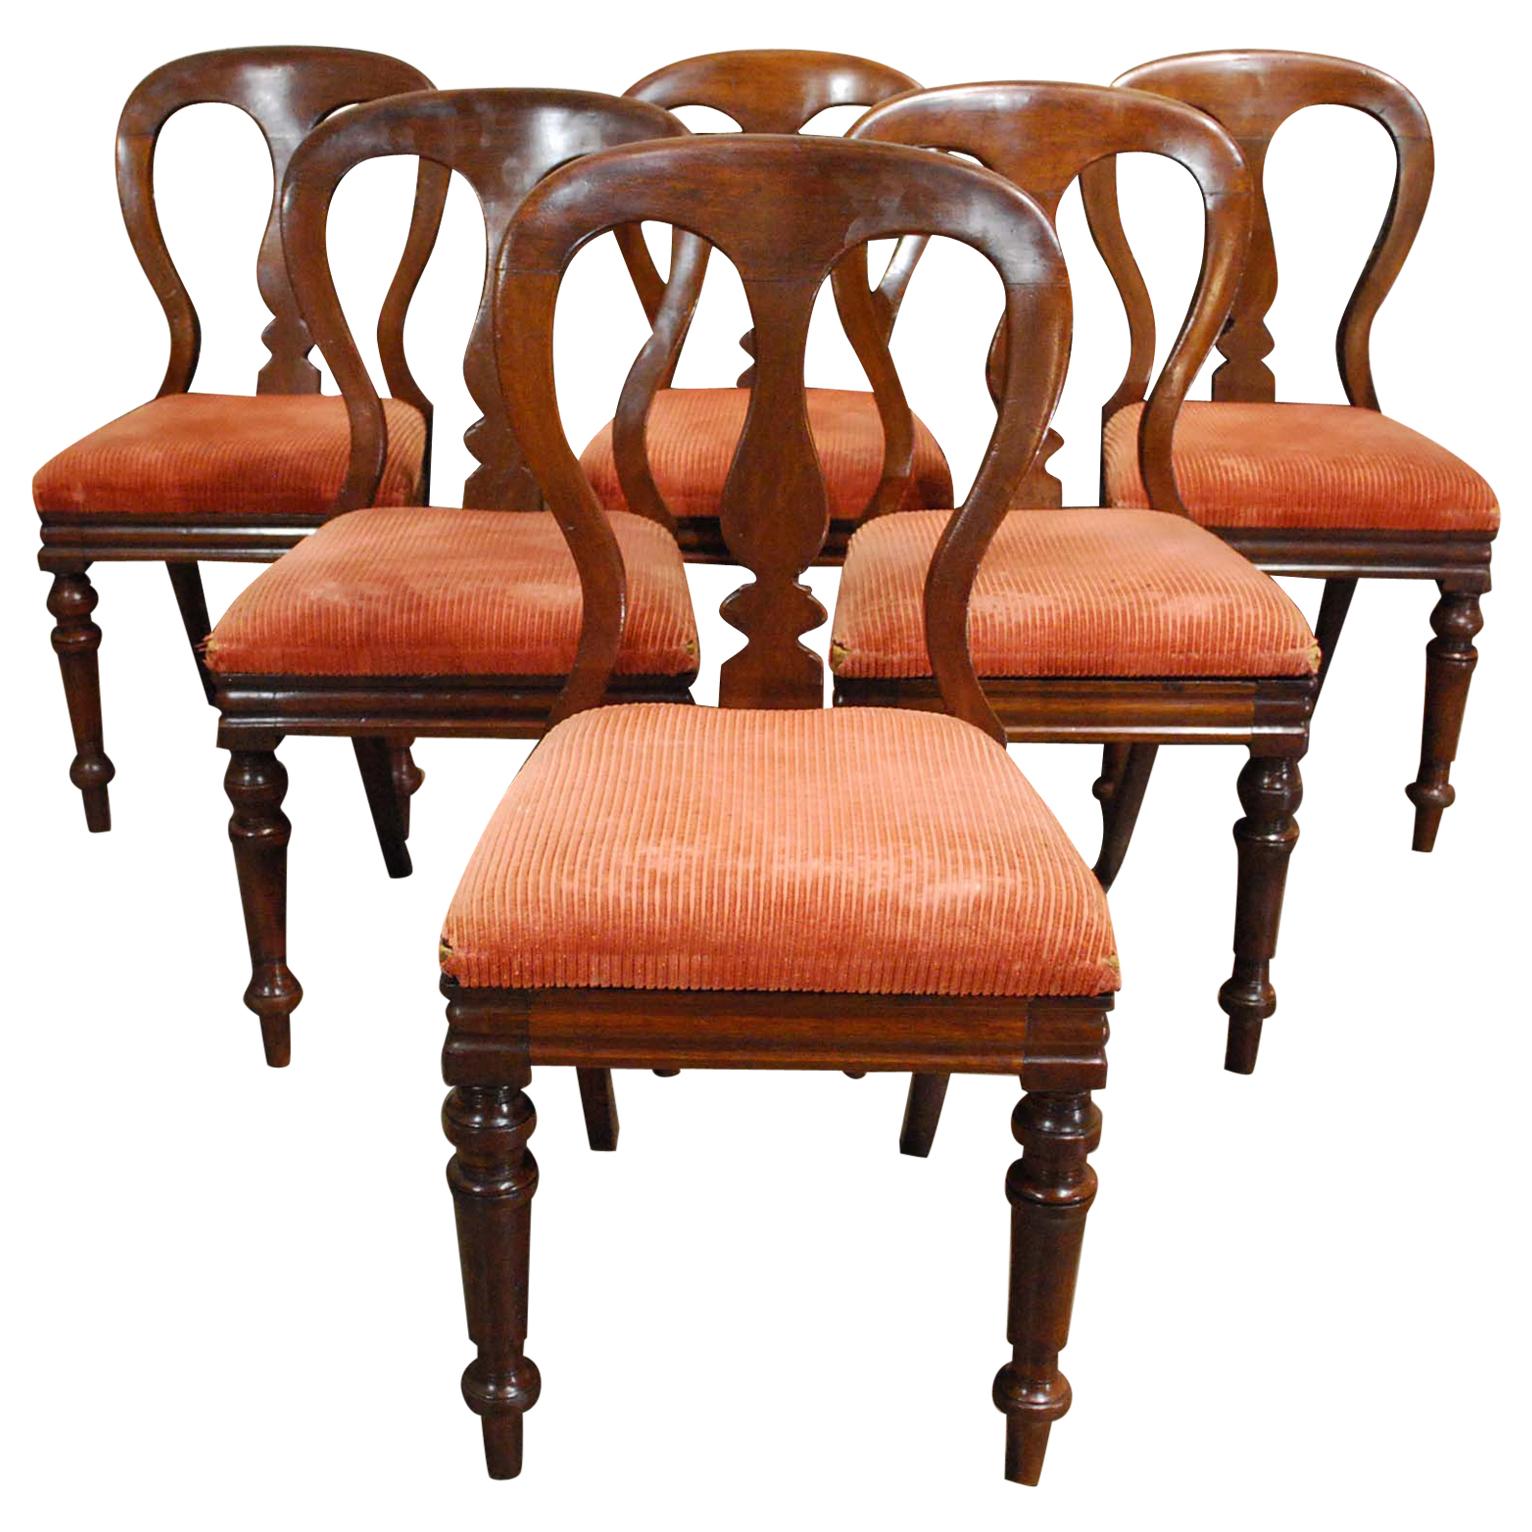 19th Century Set of 6 English Victorian Mahogany Dining Chairs by James Reilly For Sale